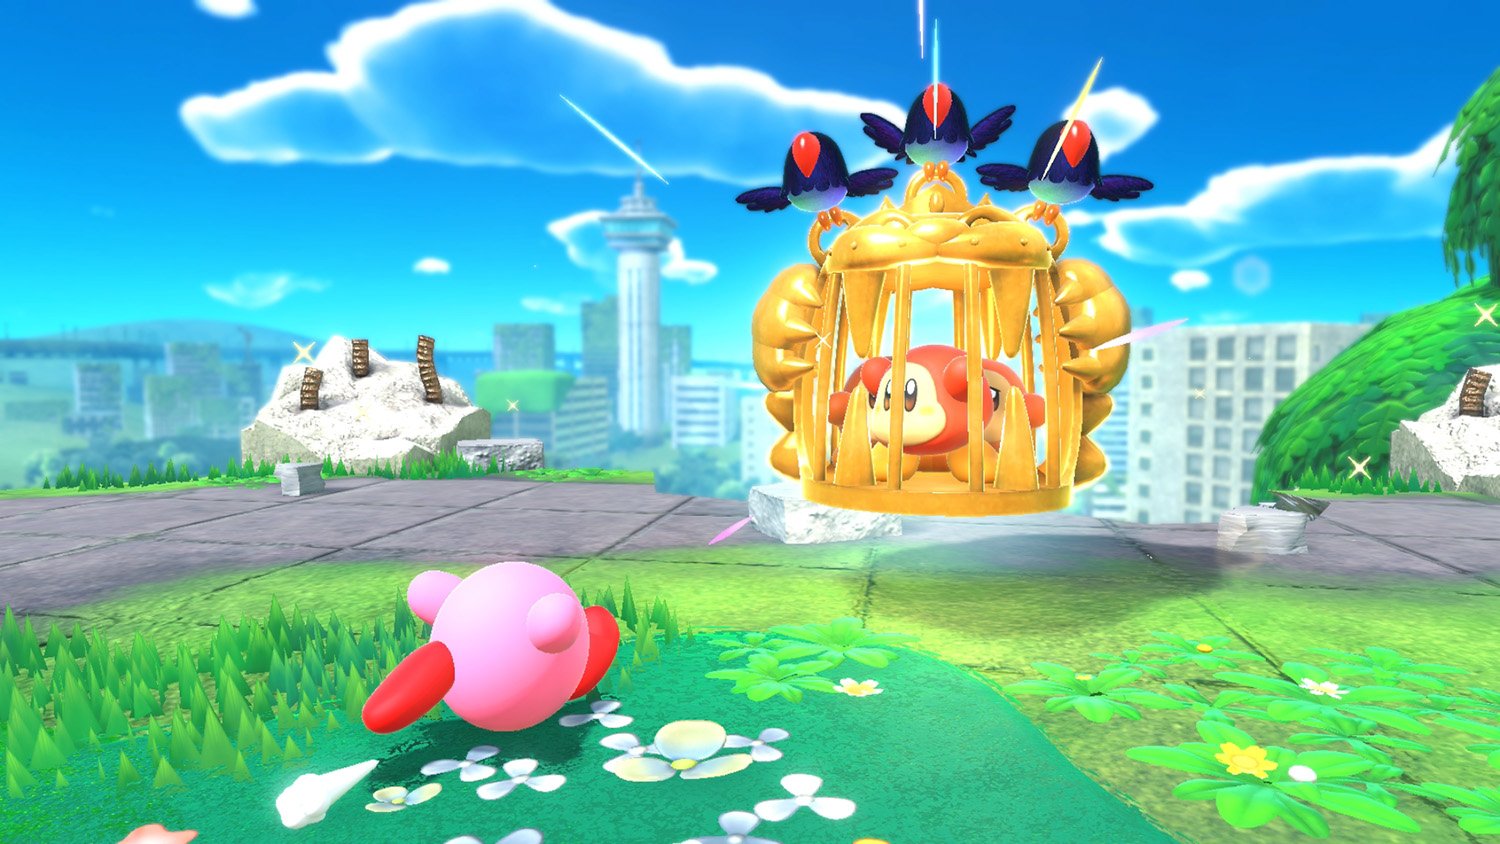 We're finally getting the Kirby co-op game for Switch that we